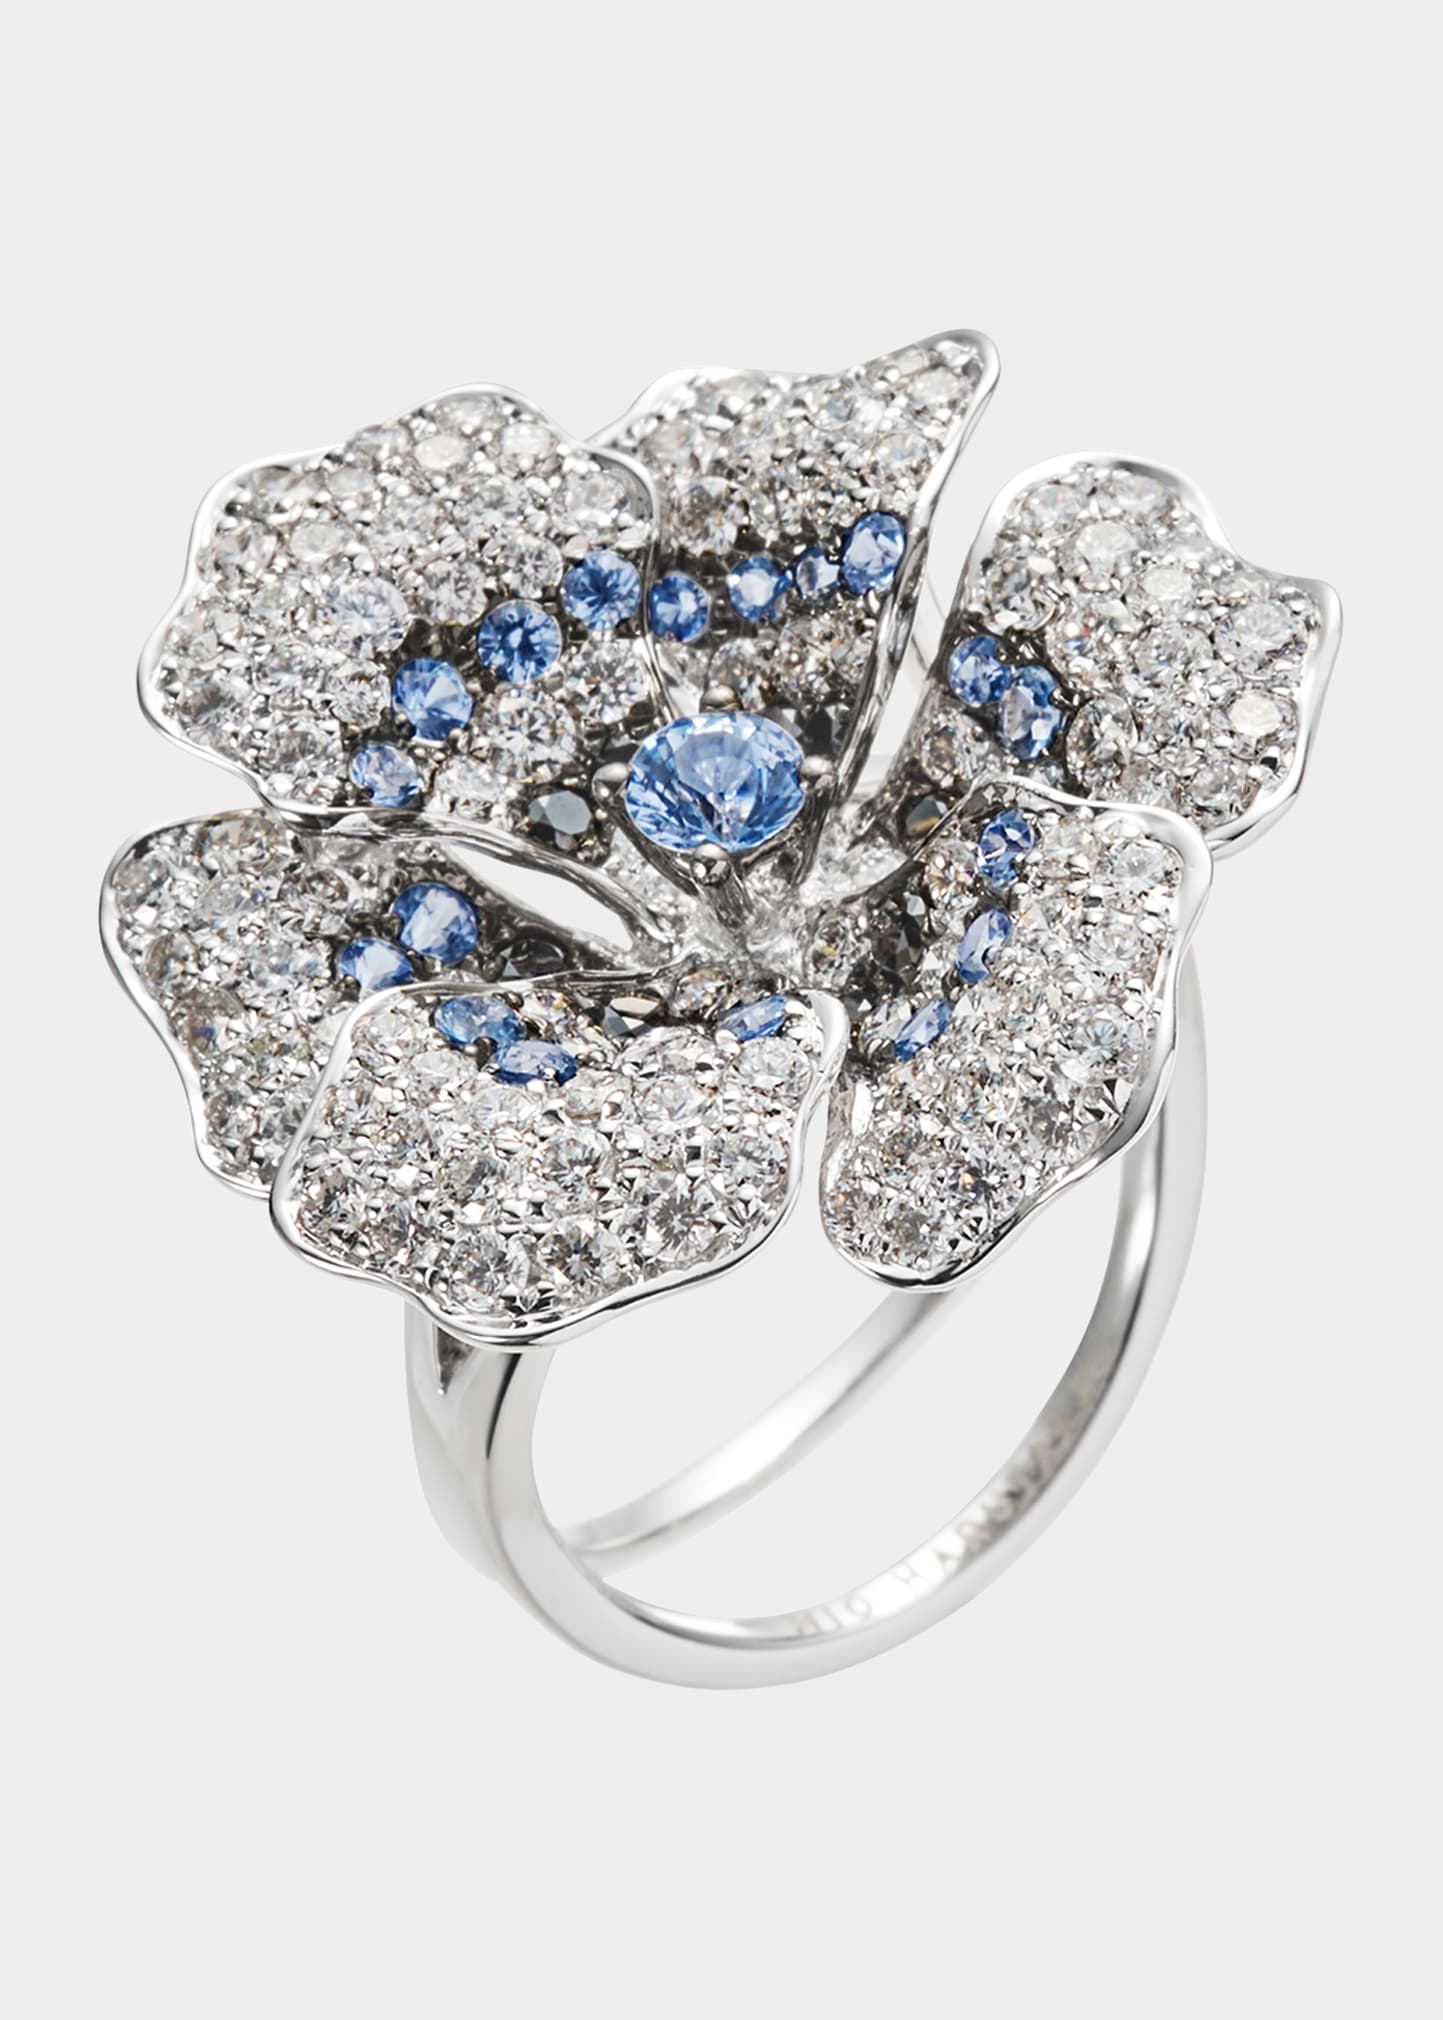 White Gold Anemone Ring with Blue Sapphires and Diamonds